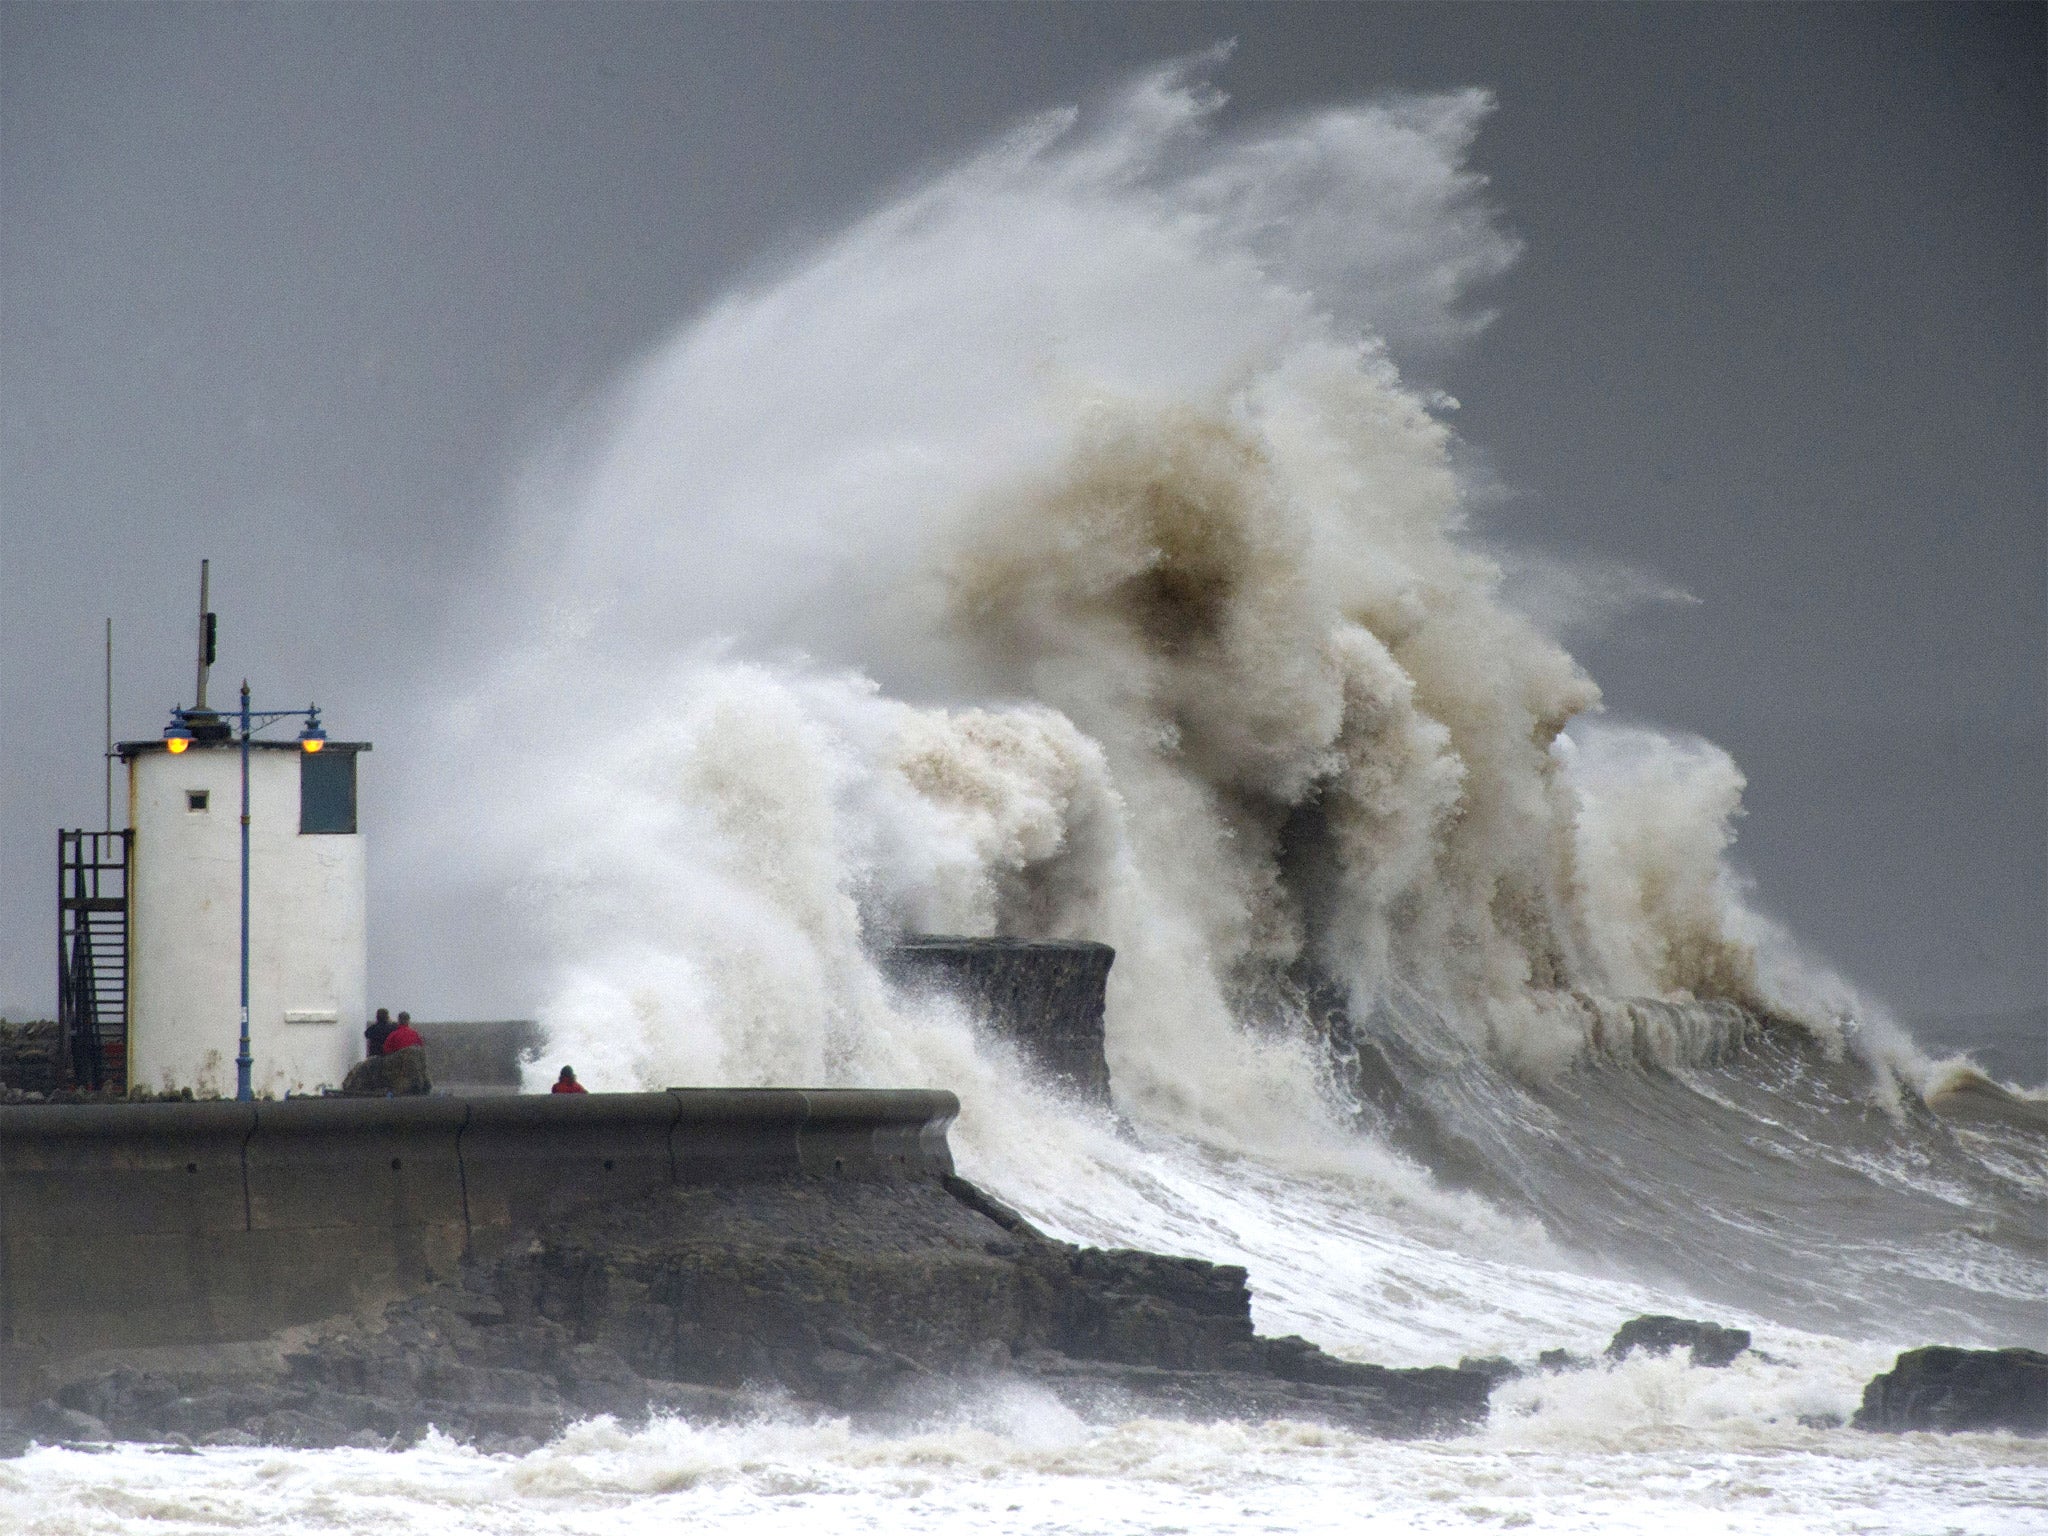 Spectators watch as waves break over the harbour wall at Porthcawl, Wales, during a high tide